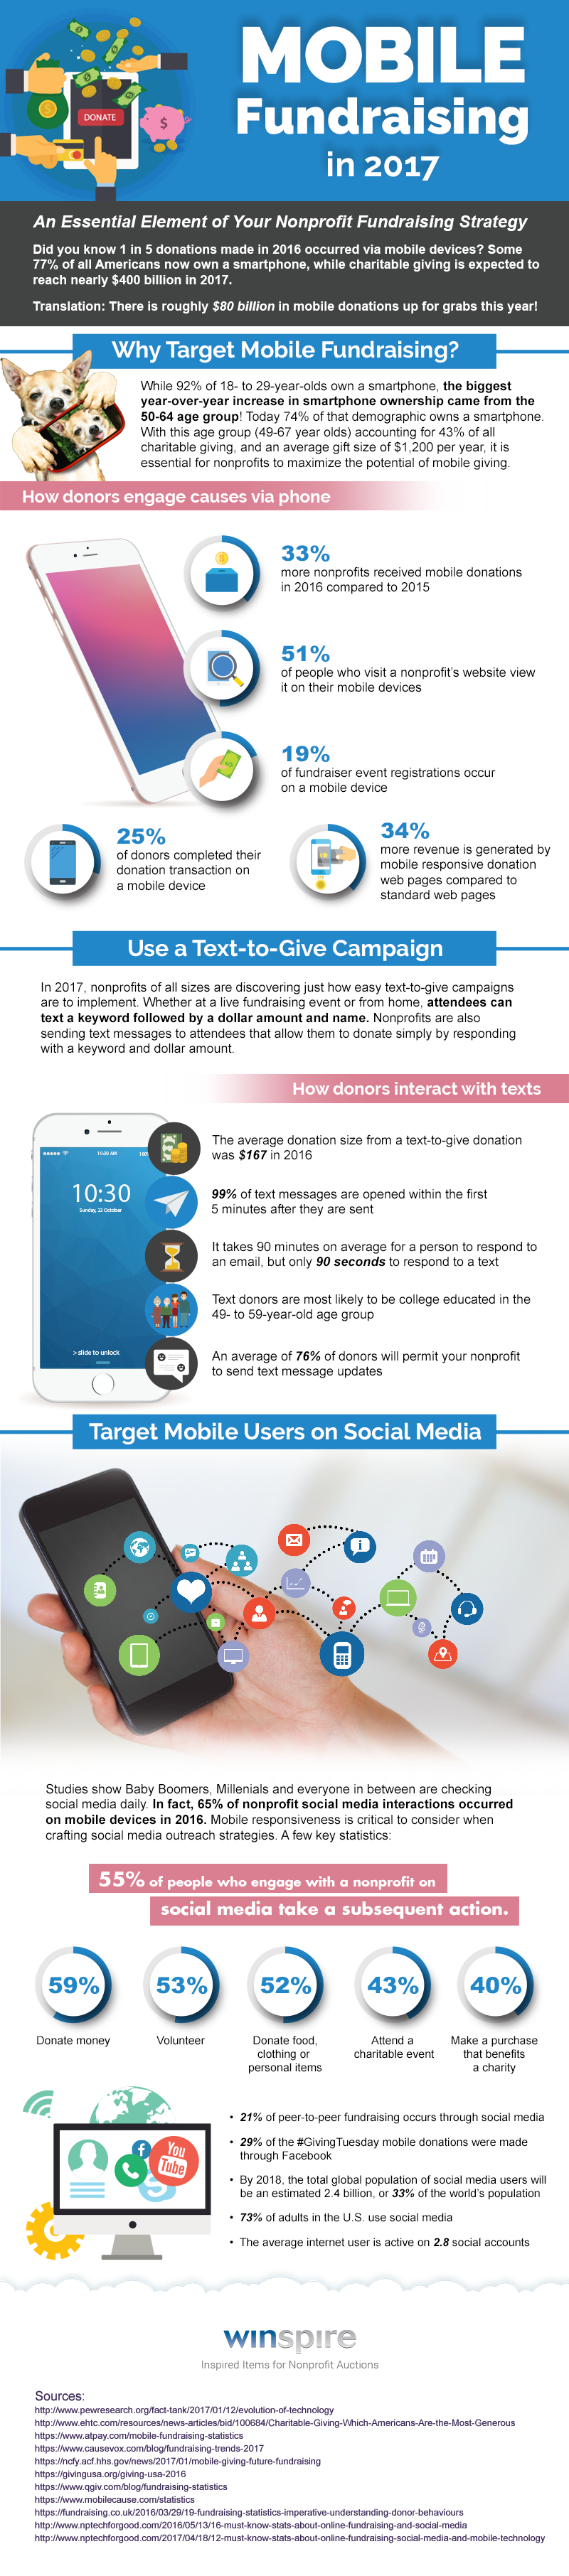 Mobile Fundraising infographic